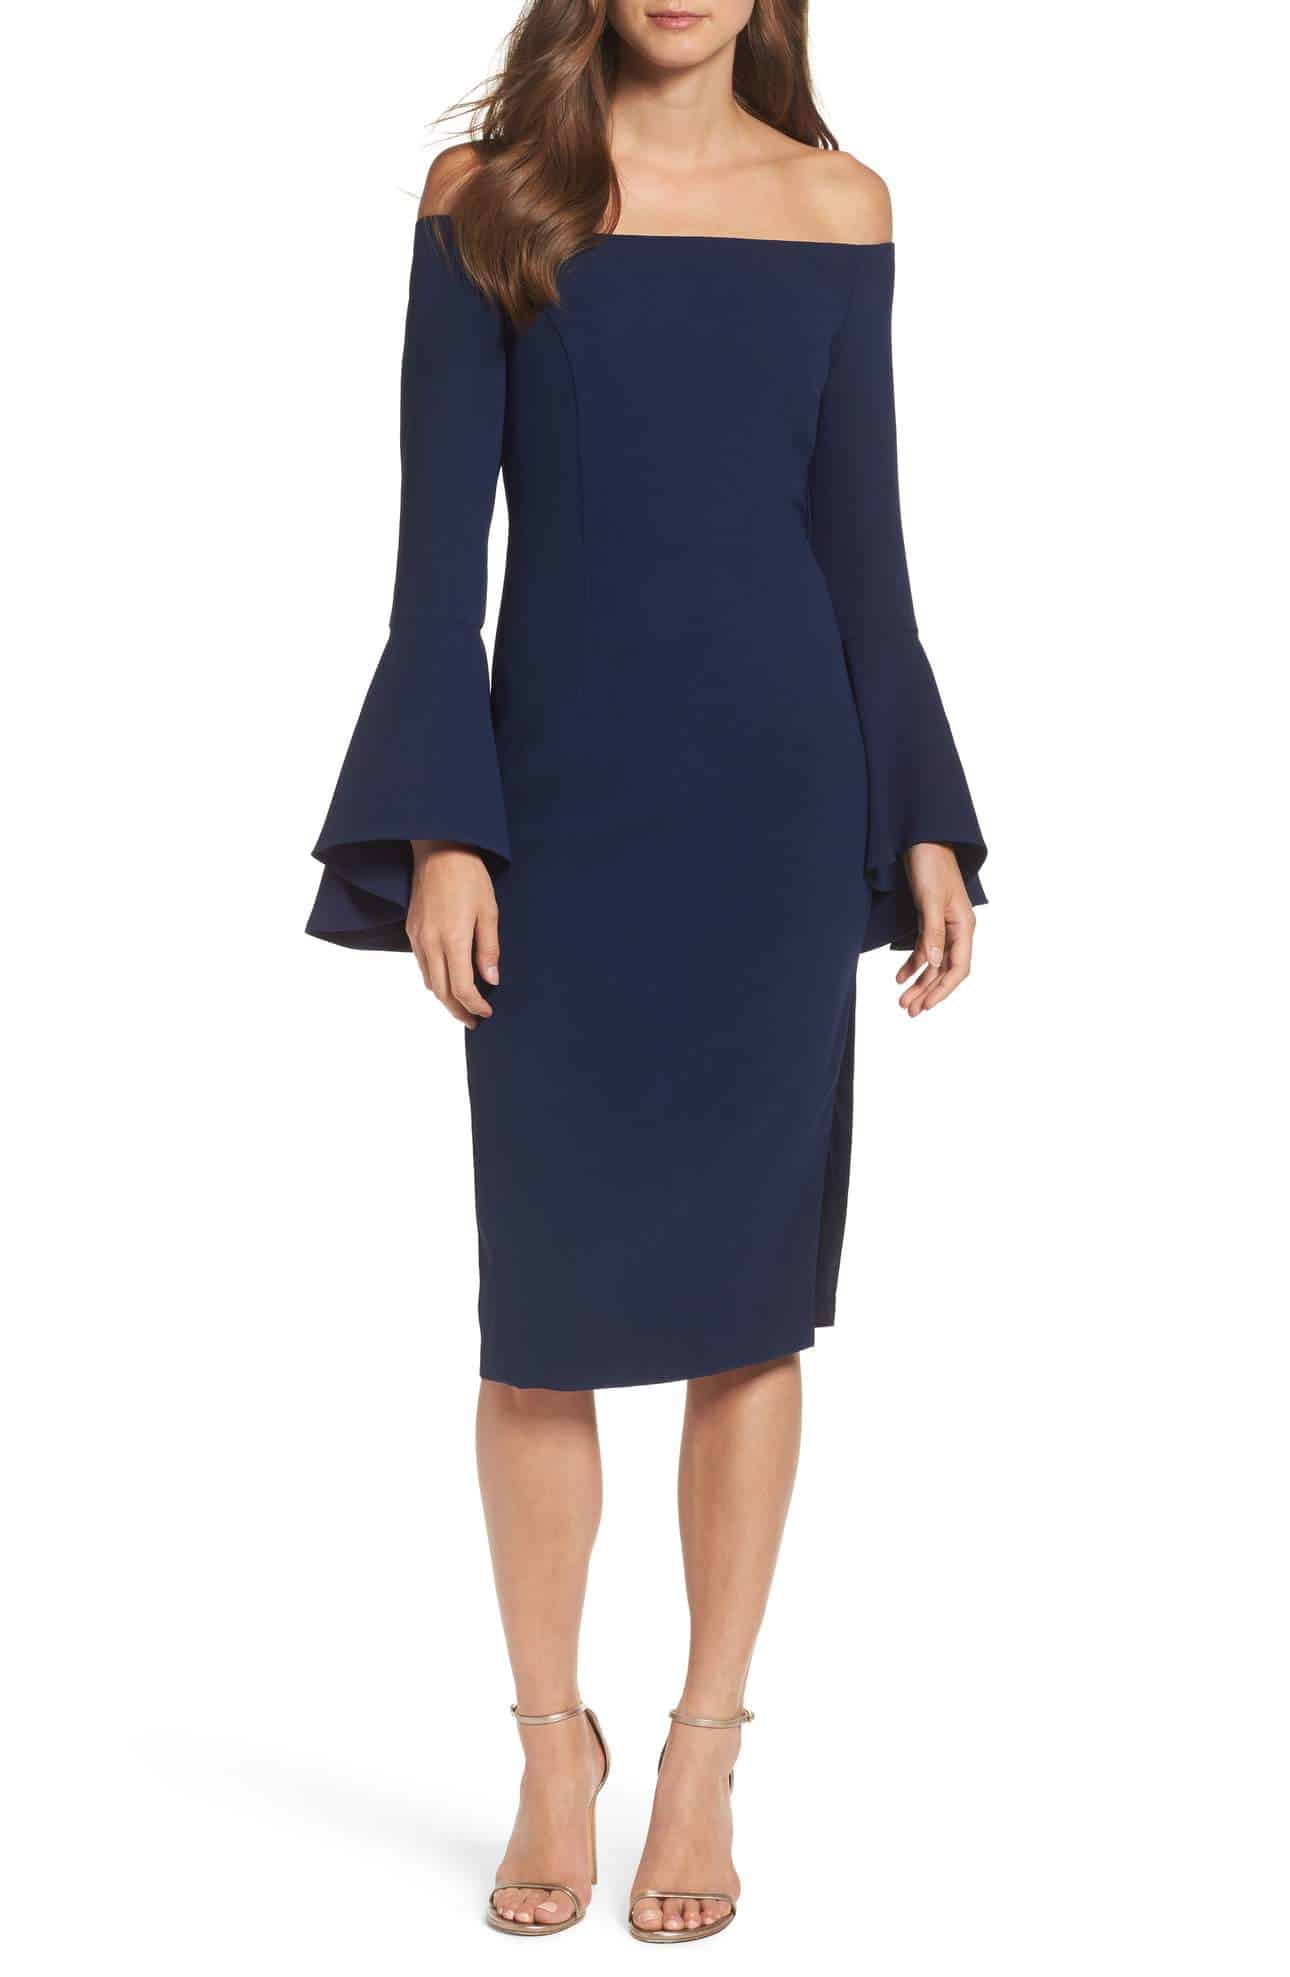 Navy and Dark Blue Dresses for Weddings - Dress for the Wedding